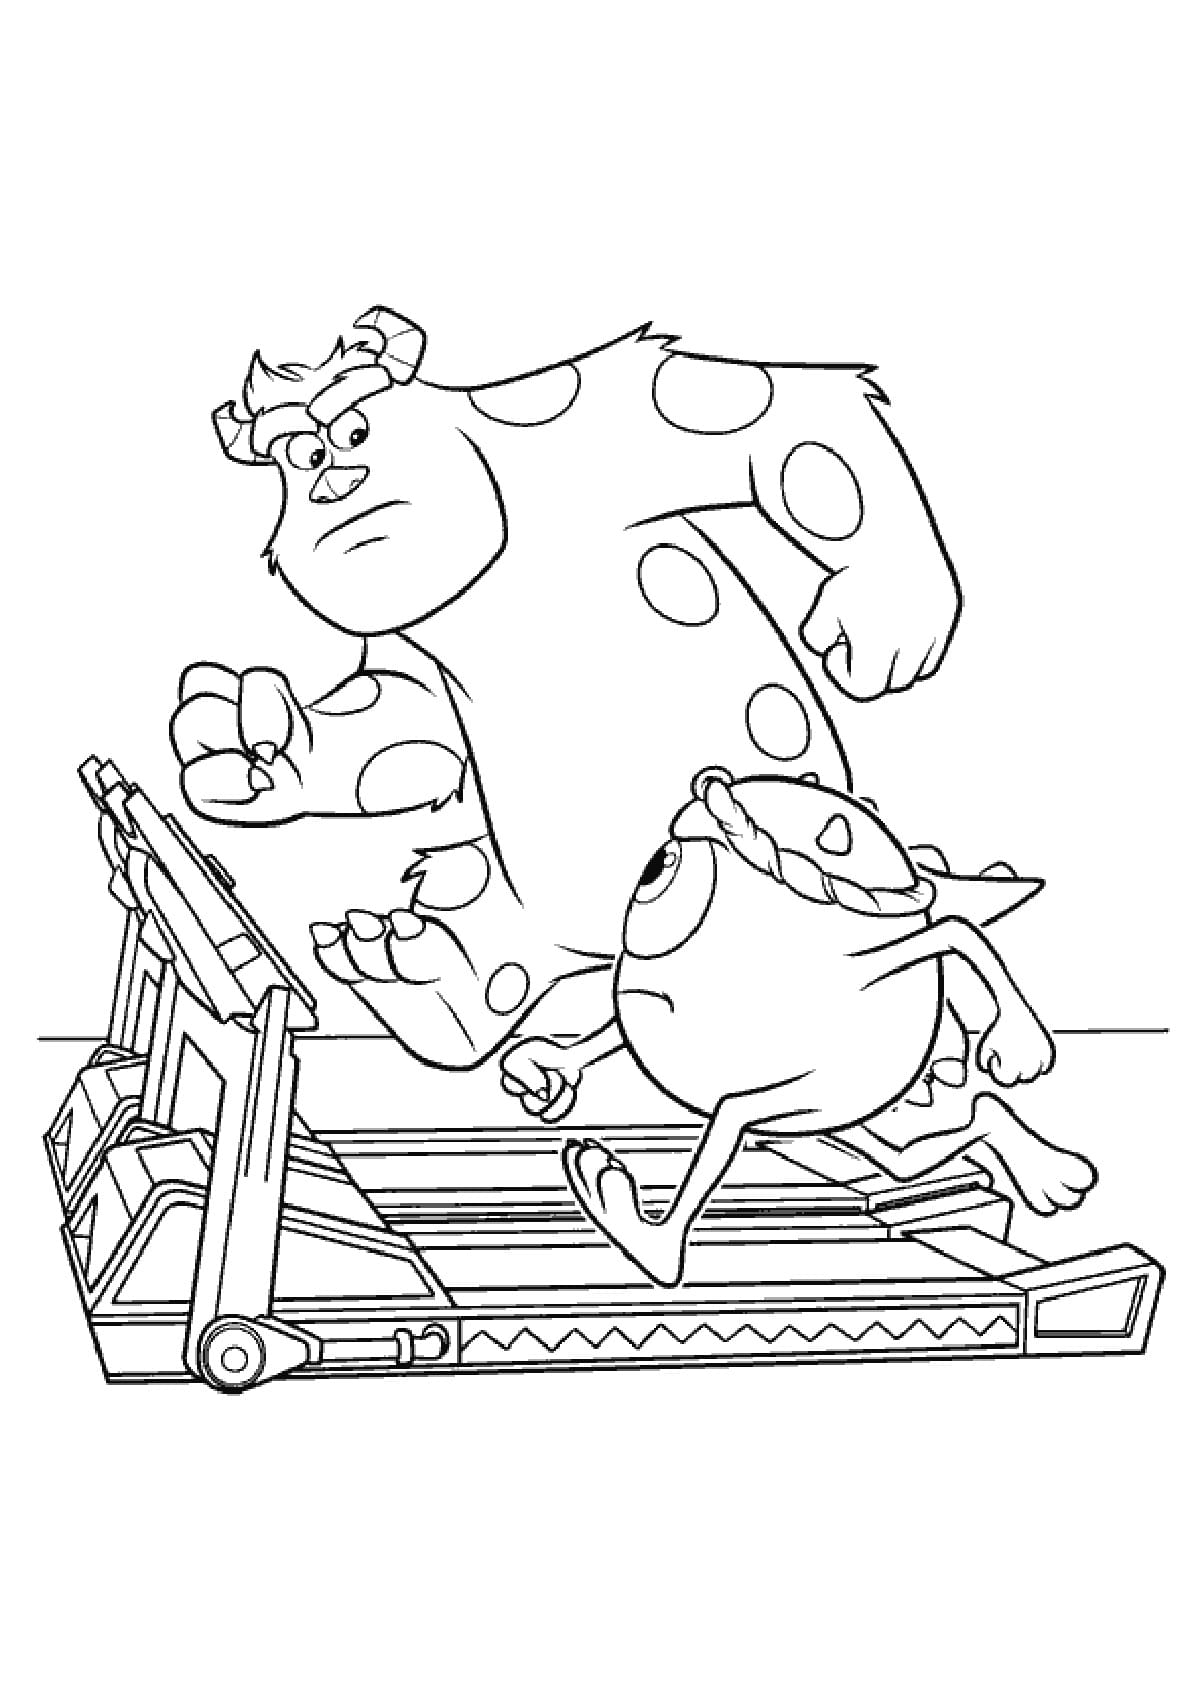 Download Monster Inc. Coloring Pages. Mike, Sally and other monsters